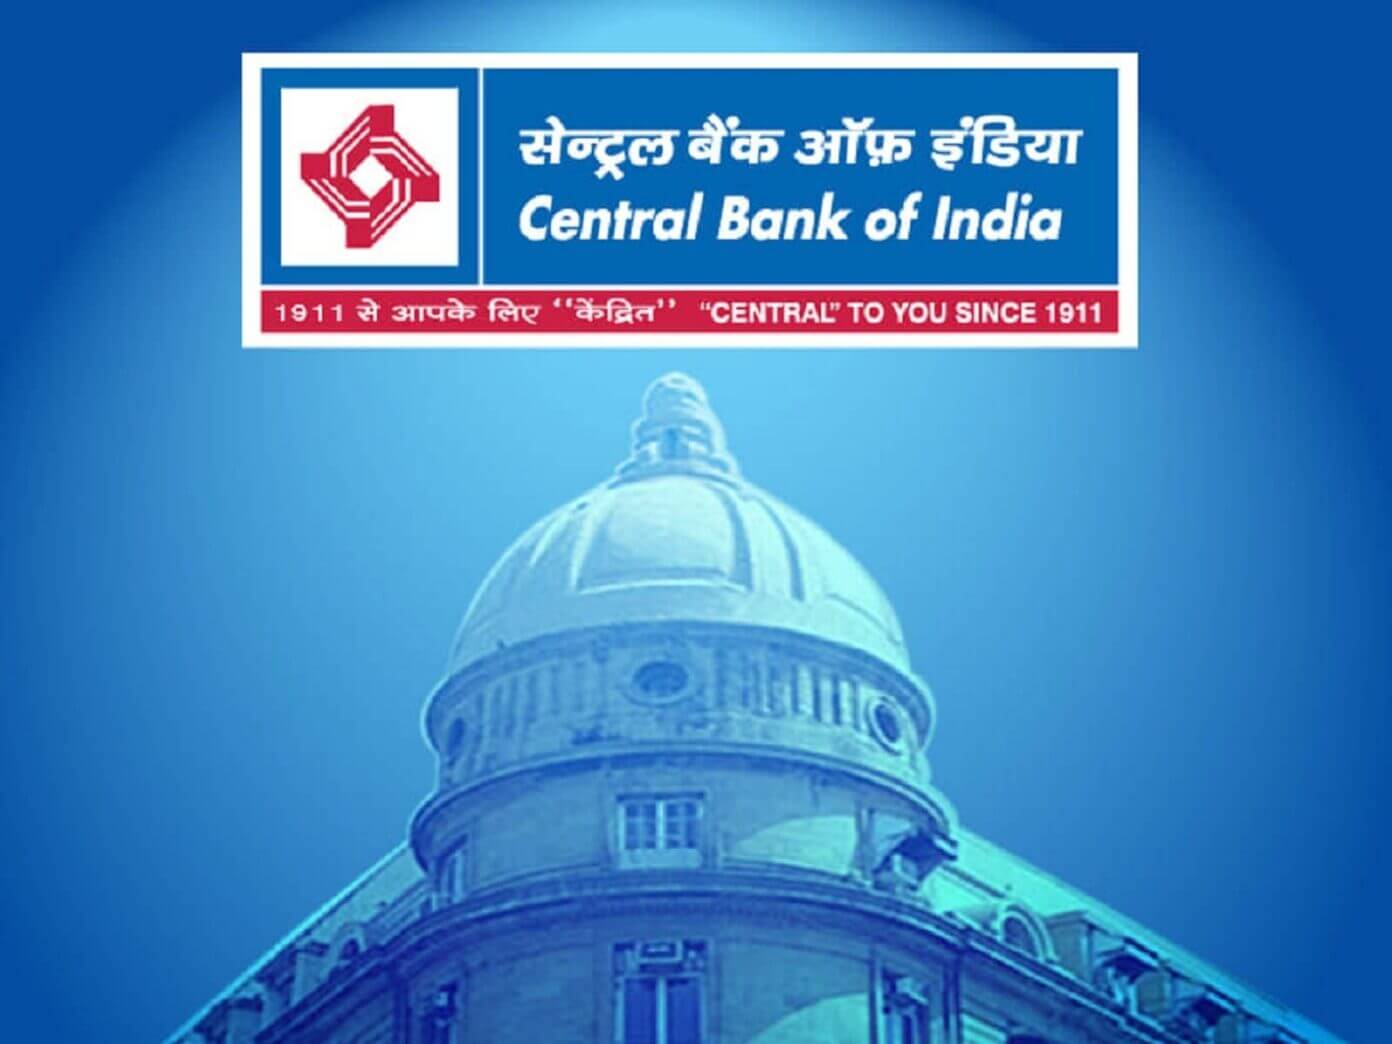 Central Bank Of India Recruitment 2024